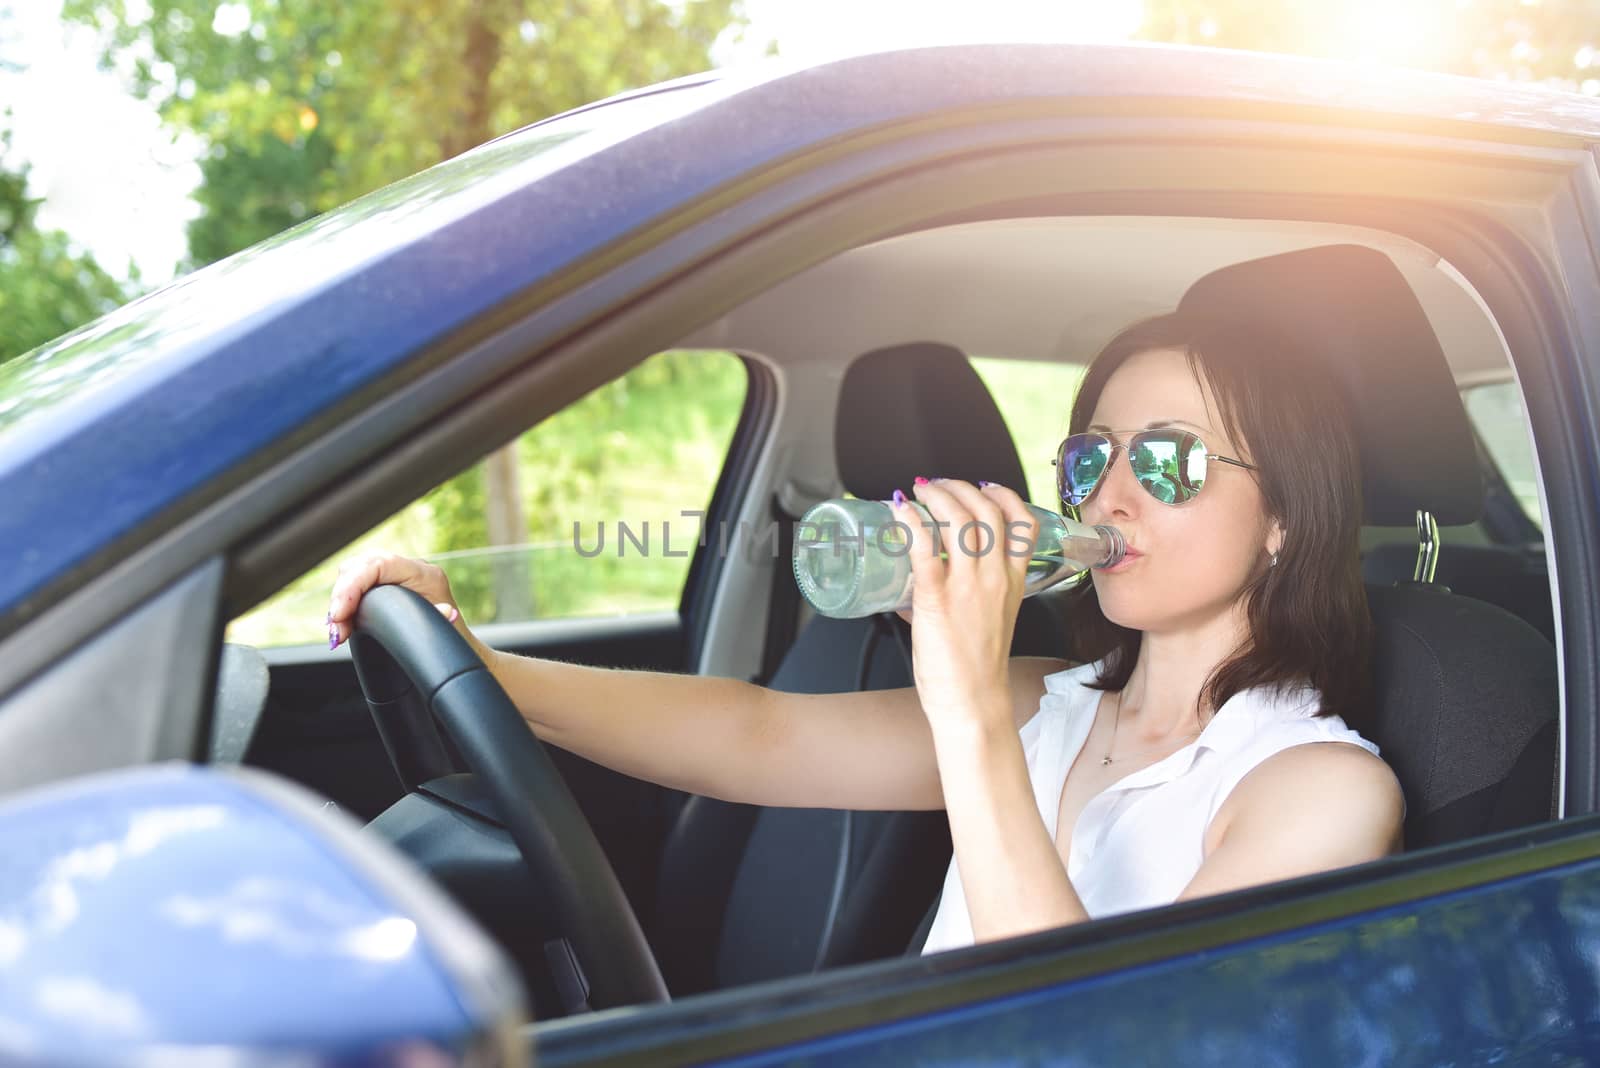 need to drink water every day, anywhere. beautiful brunette behind the wheel. drink driving.